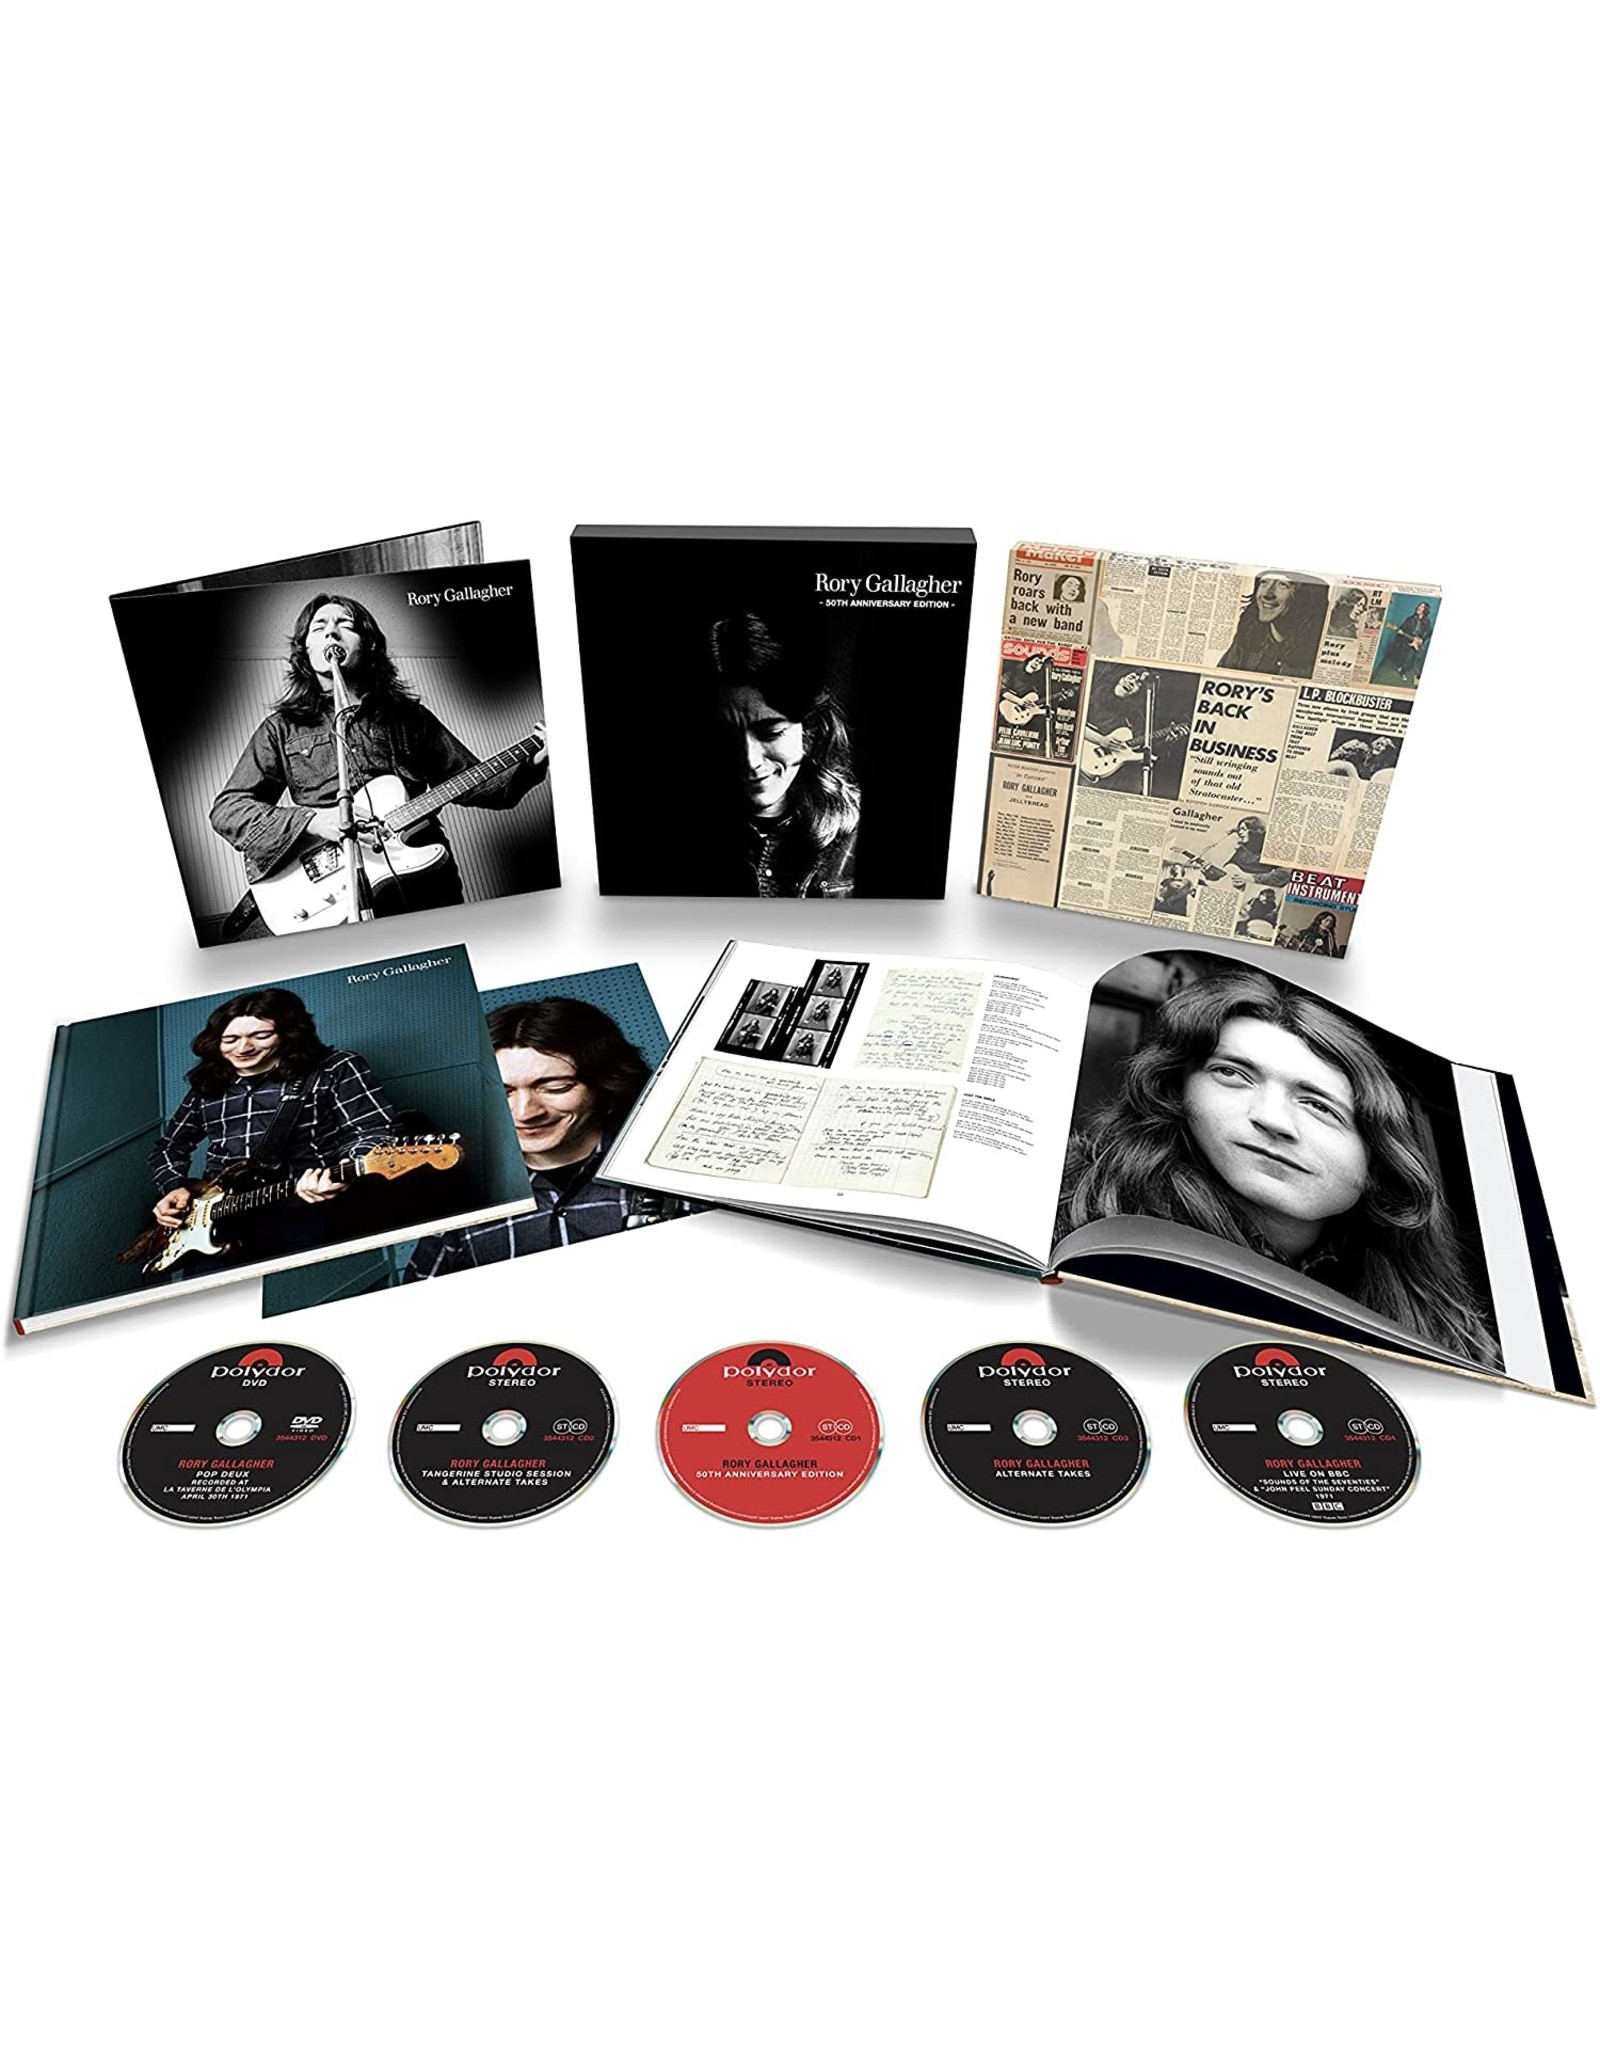 Gallagher, Rory - Rory Gallagher 50th Anniversary Limited Ed. CD/DVD Boxset